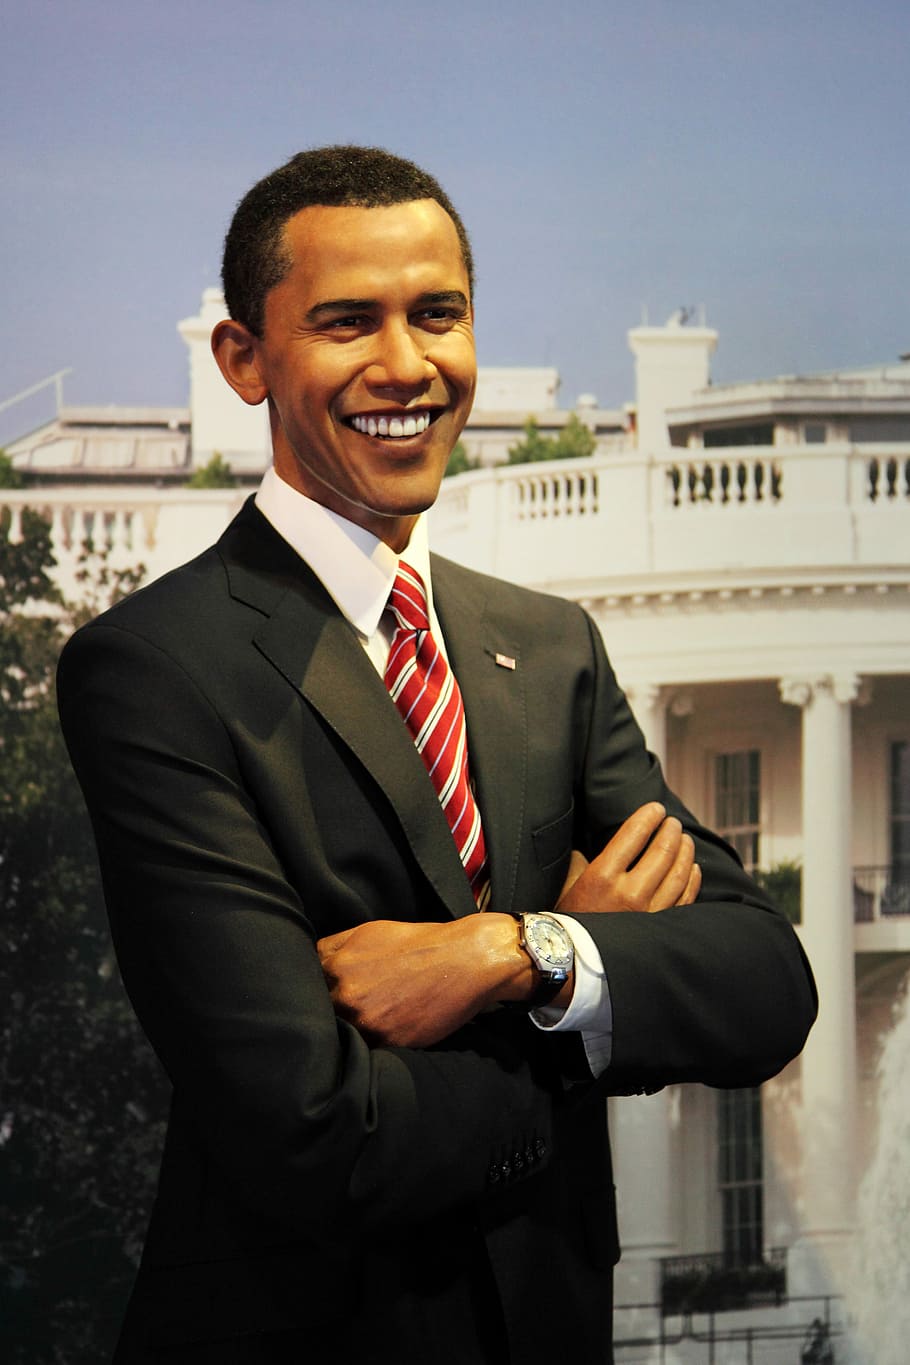 Man in Suit with Barack Obama Face, photos, politician, president, HD wallpaper